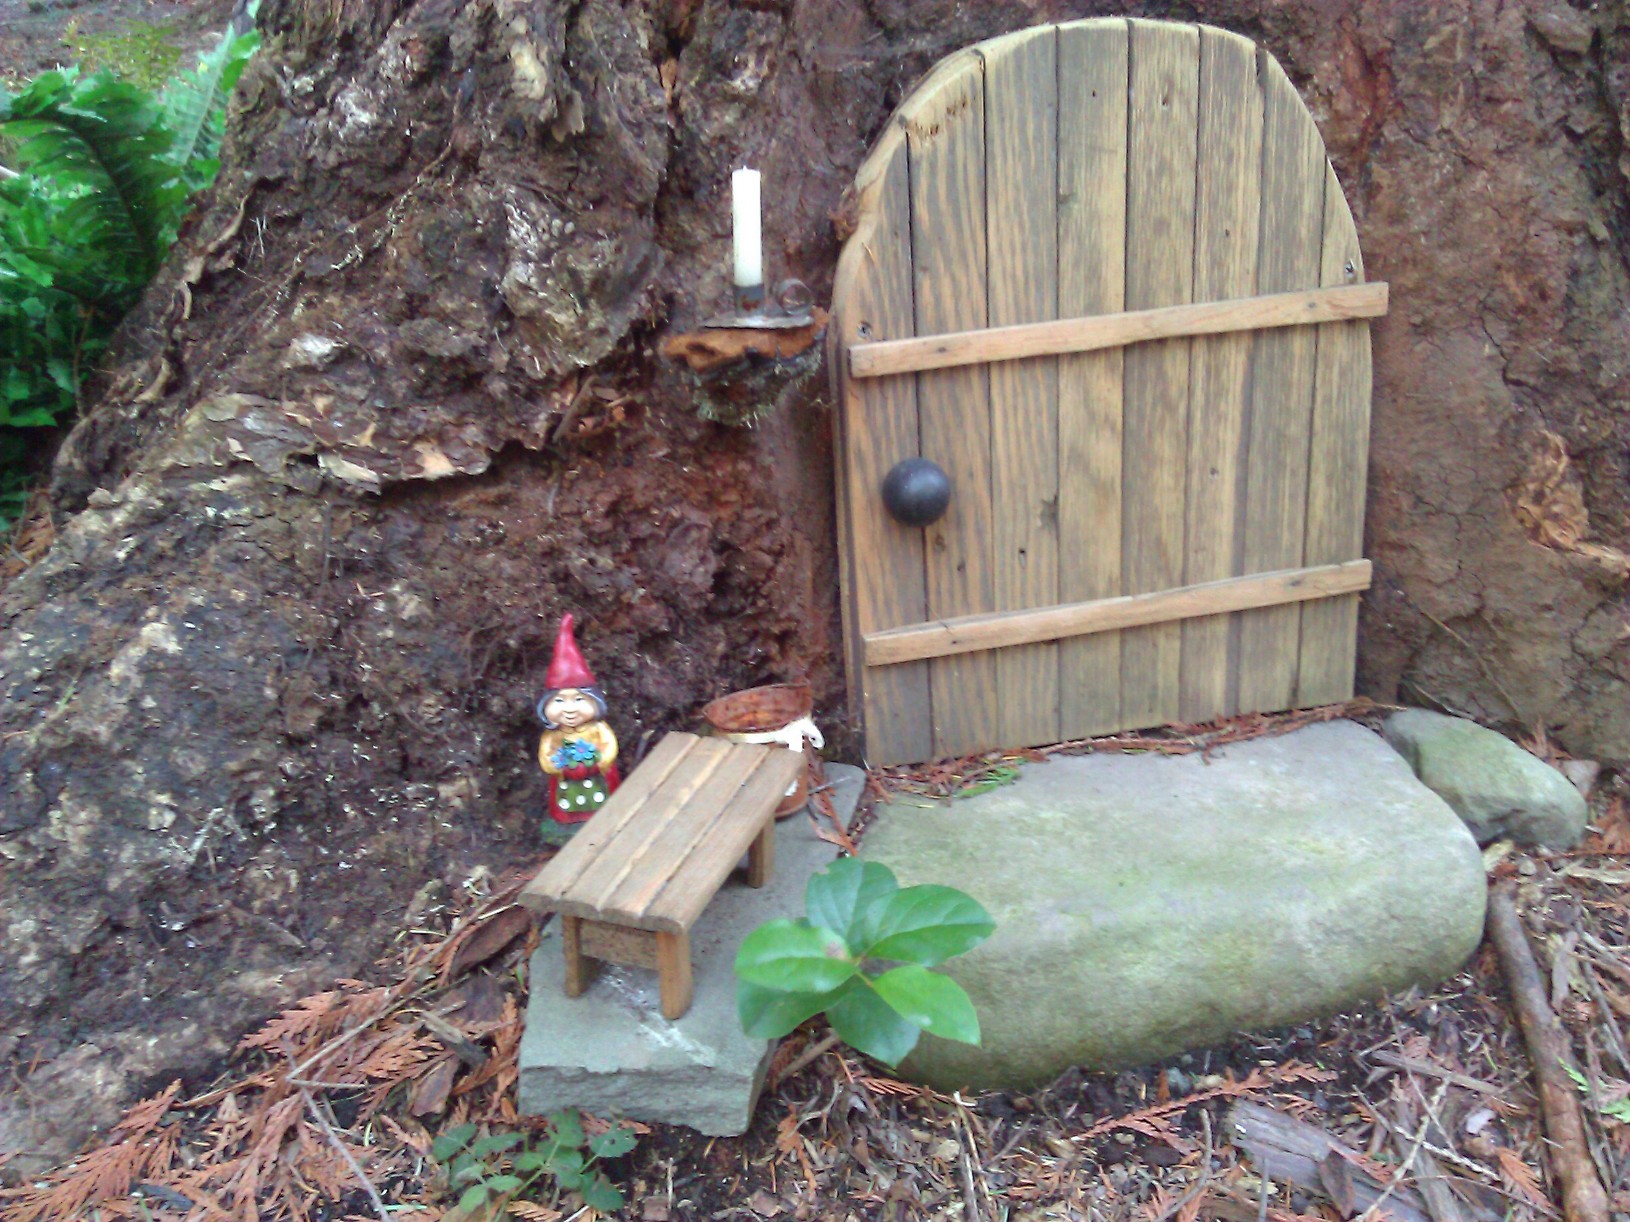 Entrance to the Fairy House